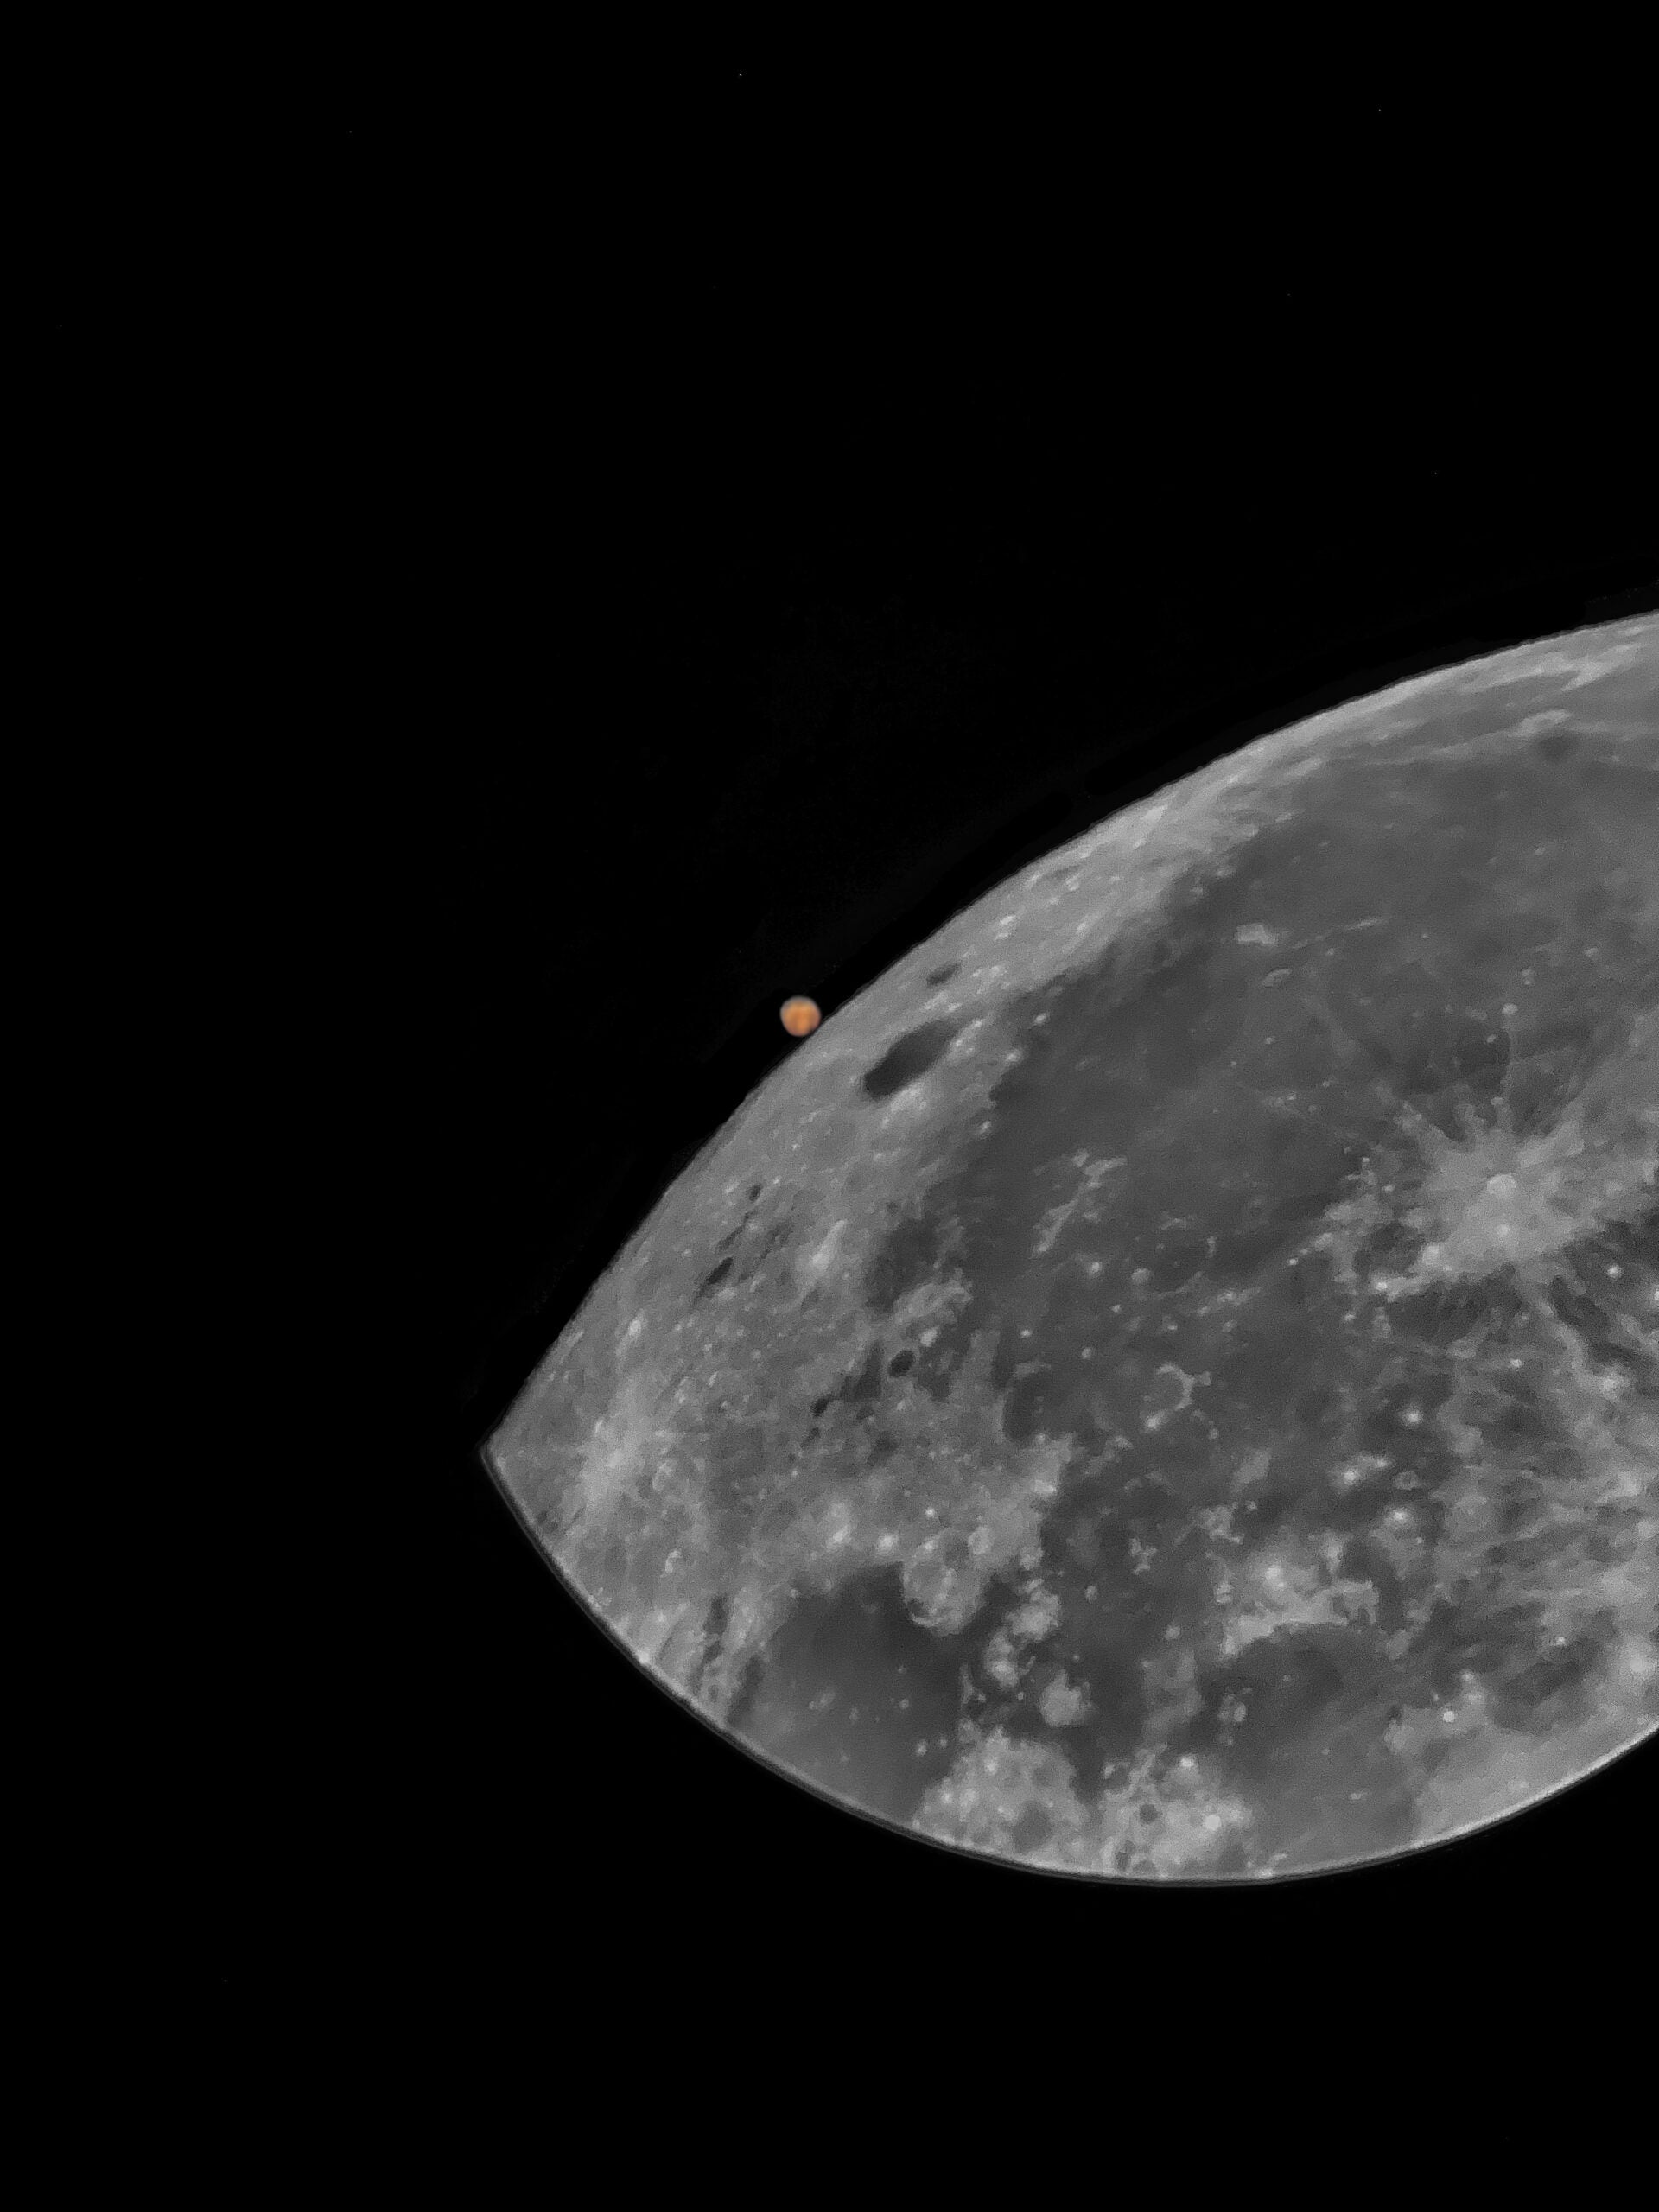 the moon large in the foreground with mars smaller in the background